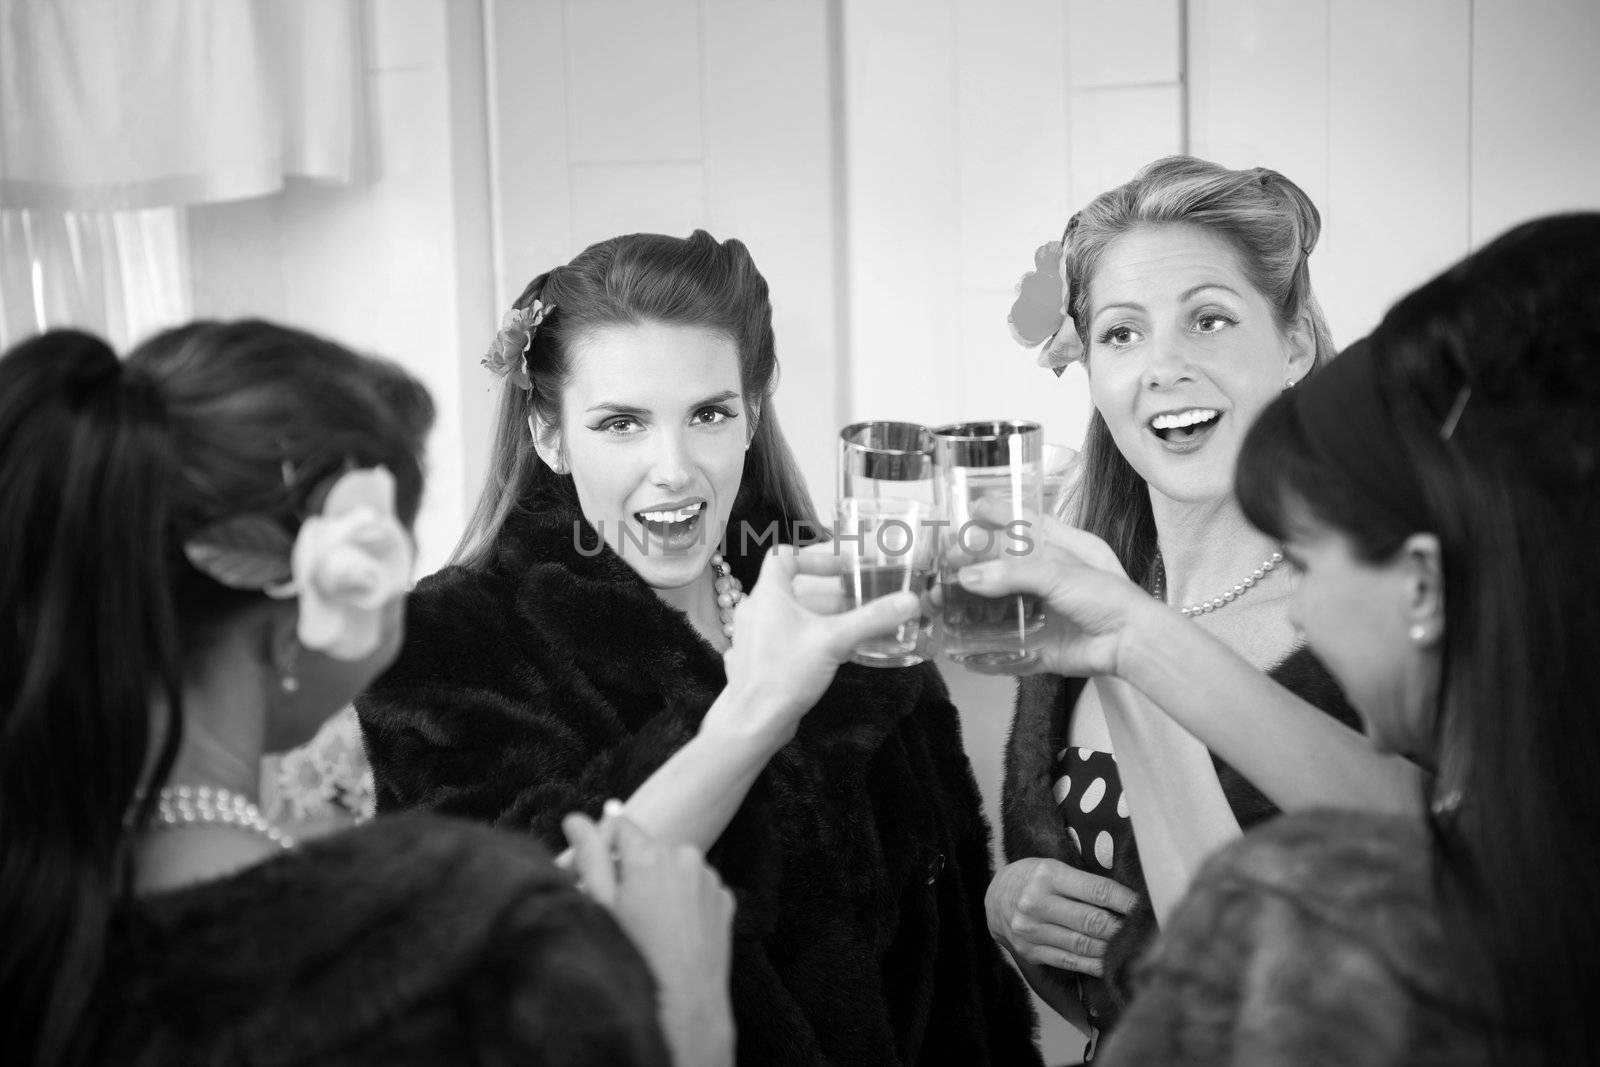 Group of four Caucasian housewives raise a toast in a kitchen